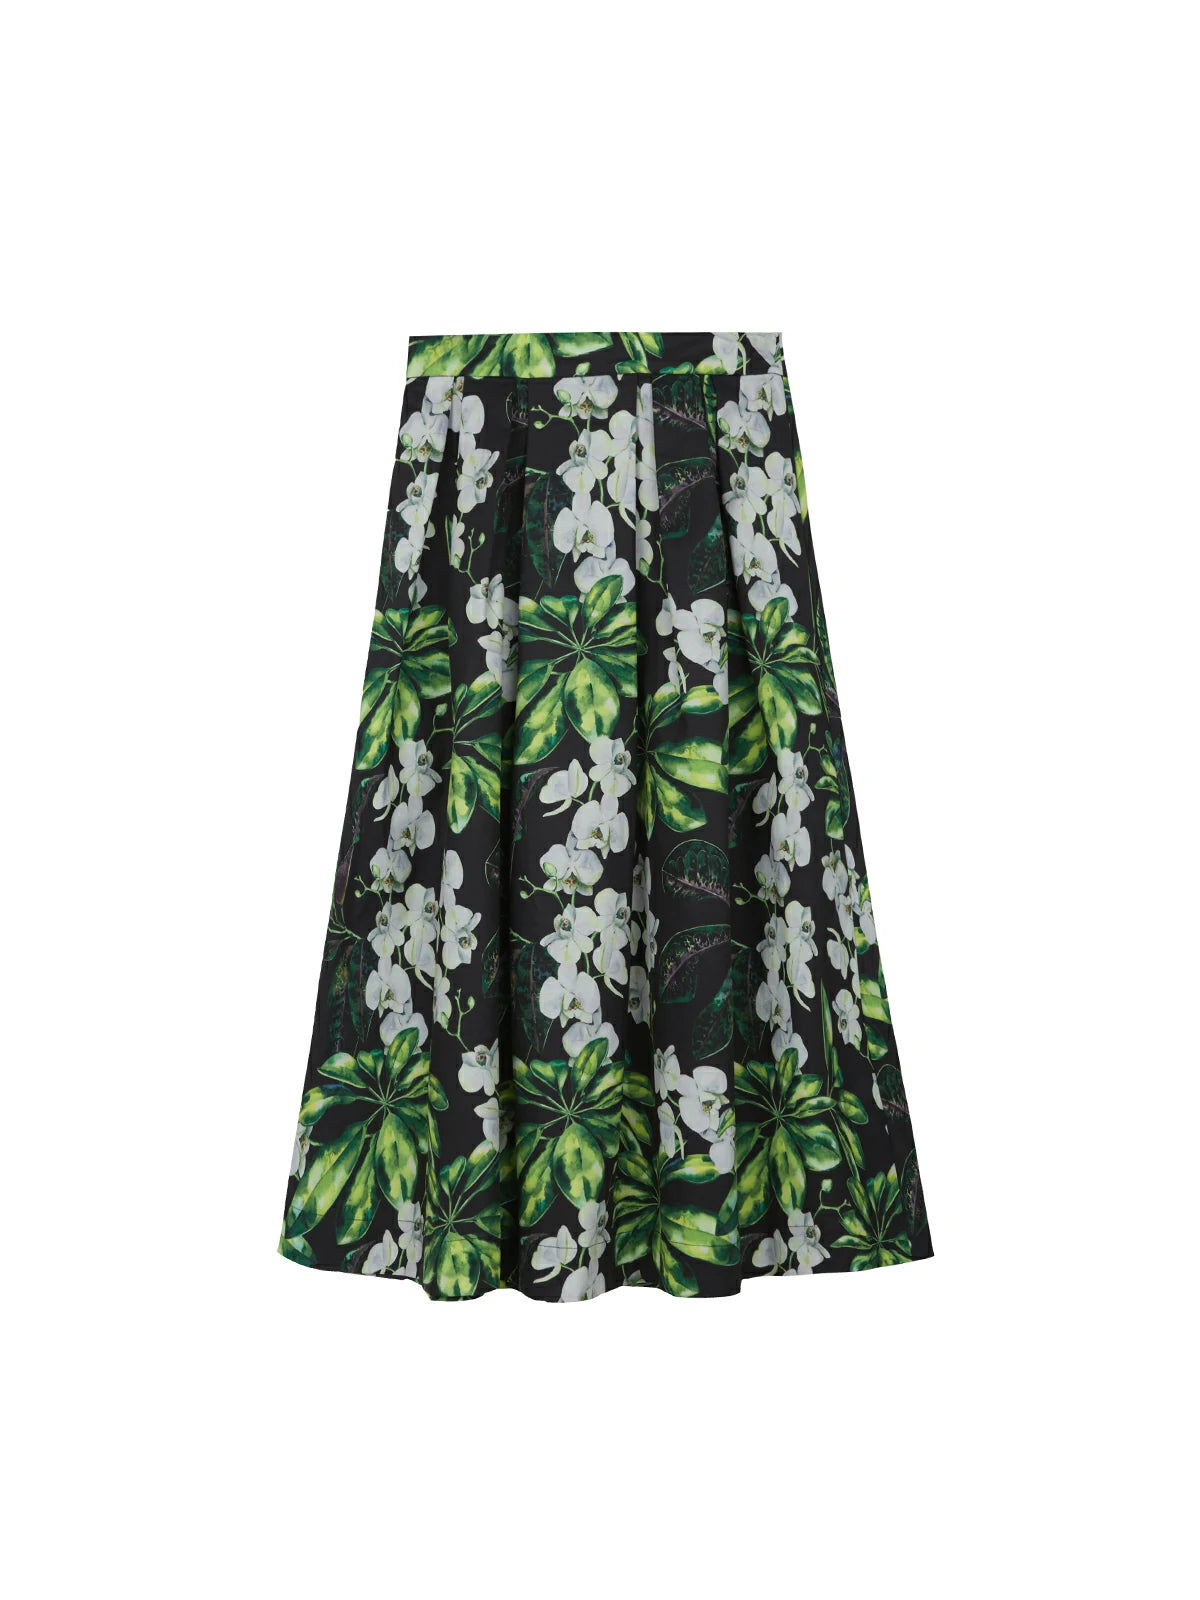 Vibrant color-blocked floral A-line midi skirt designed with a high-waisted fit and layered pleats, perfect for expressing a youthful and stylish look.